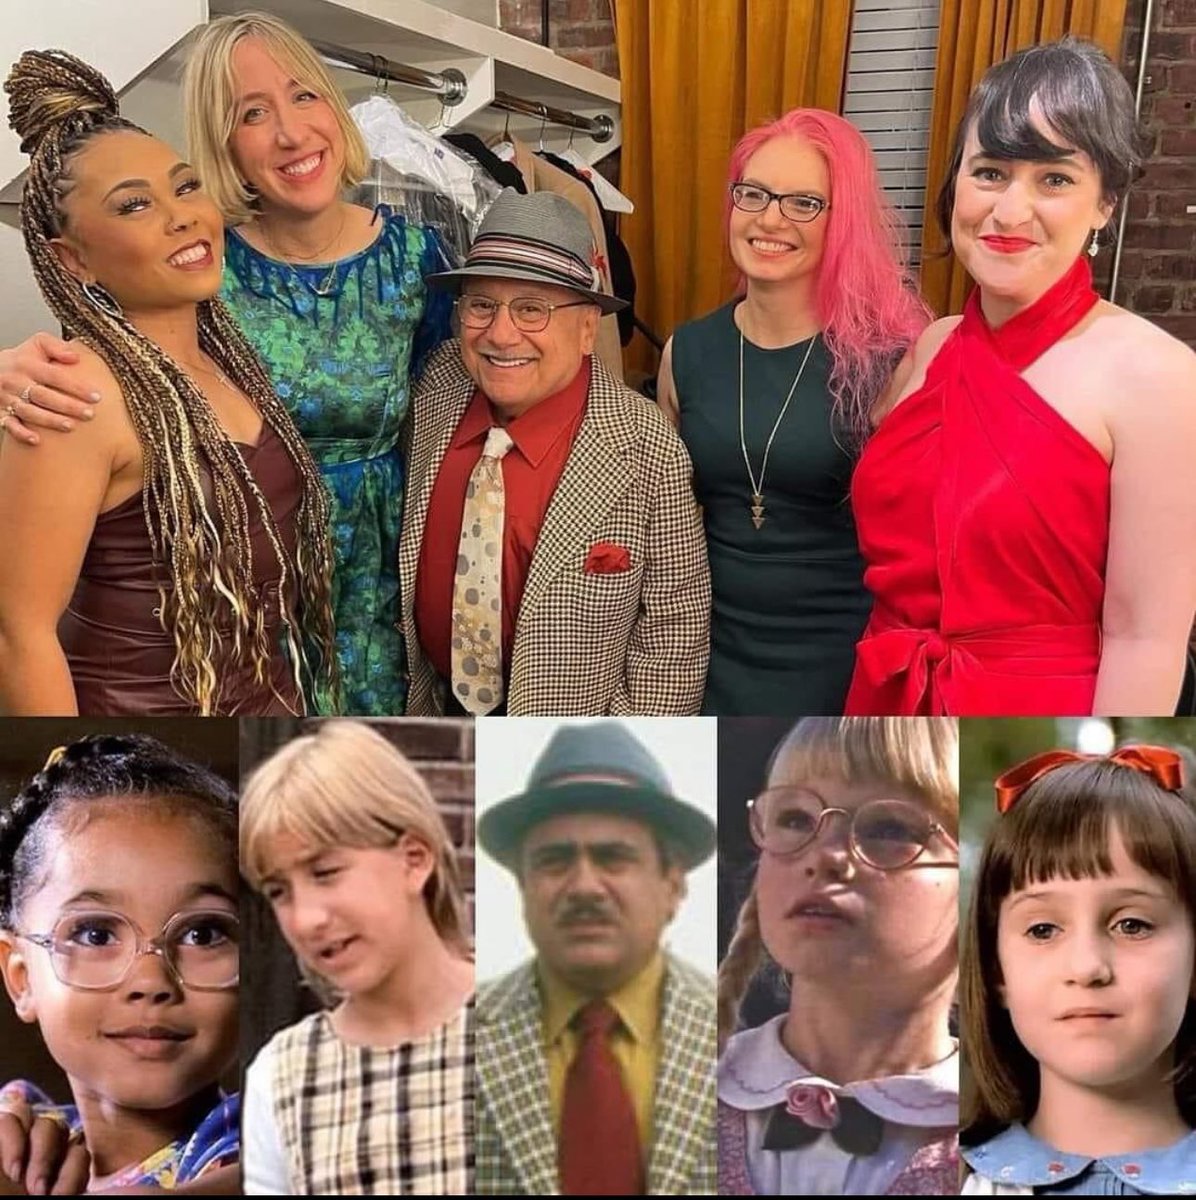 The cast of Matilda 28 years later.
Still one of my all time favorite movies